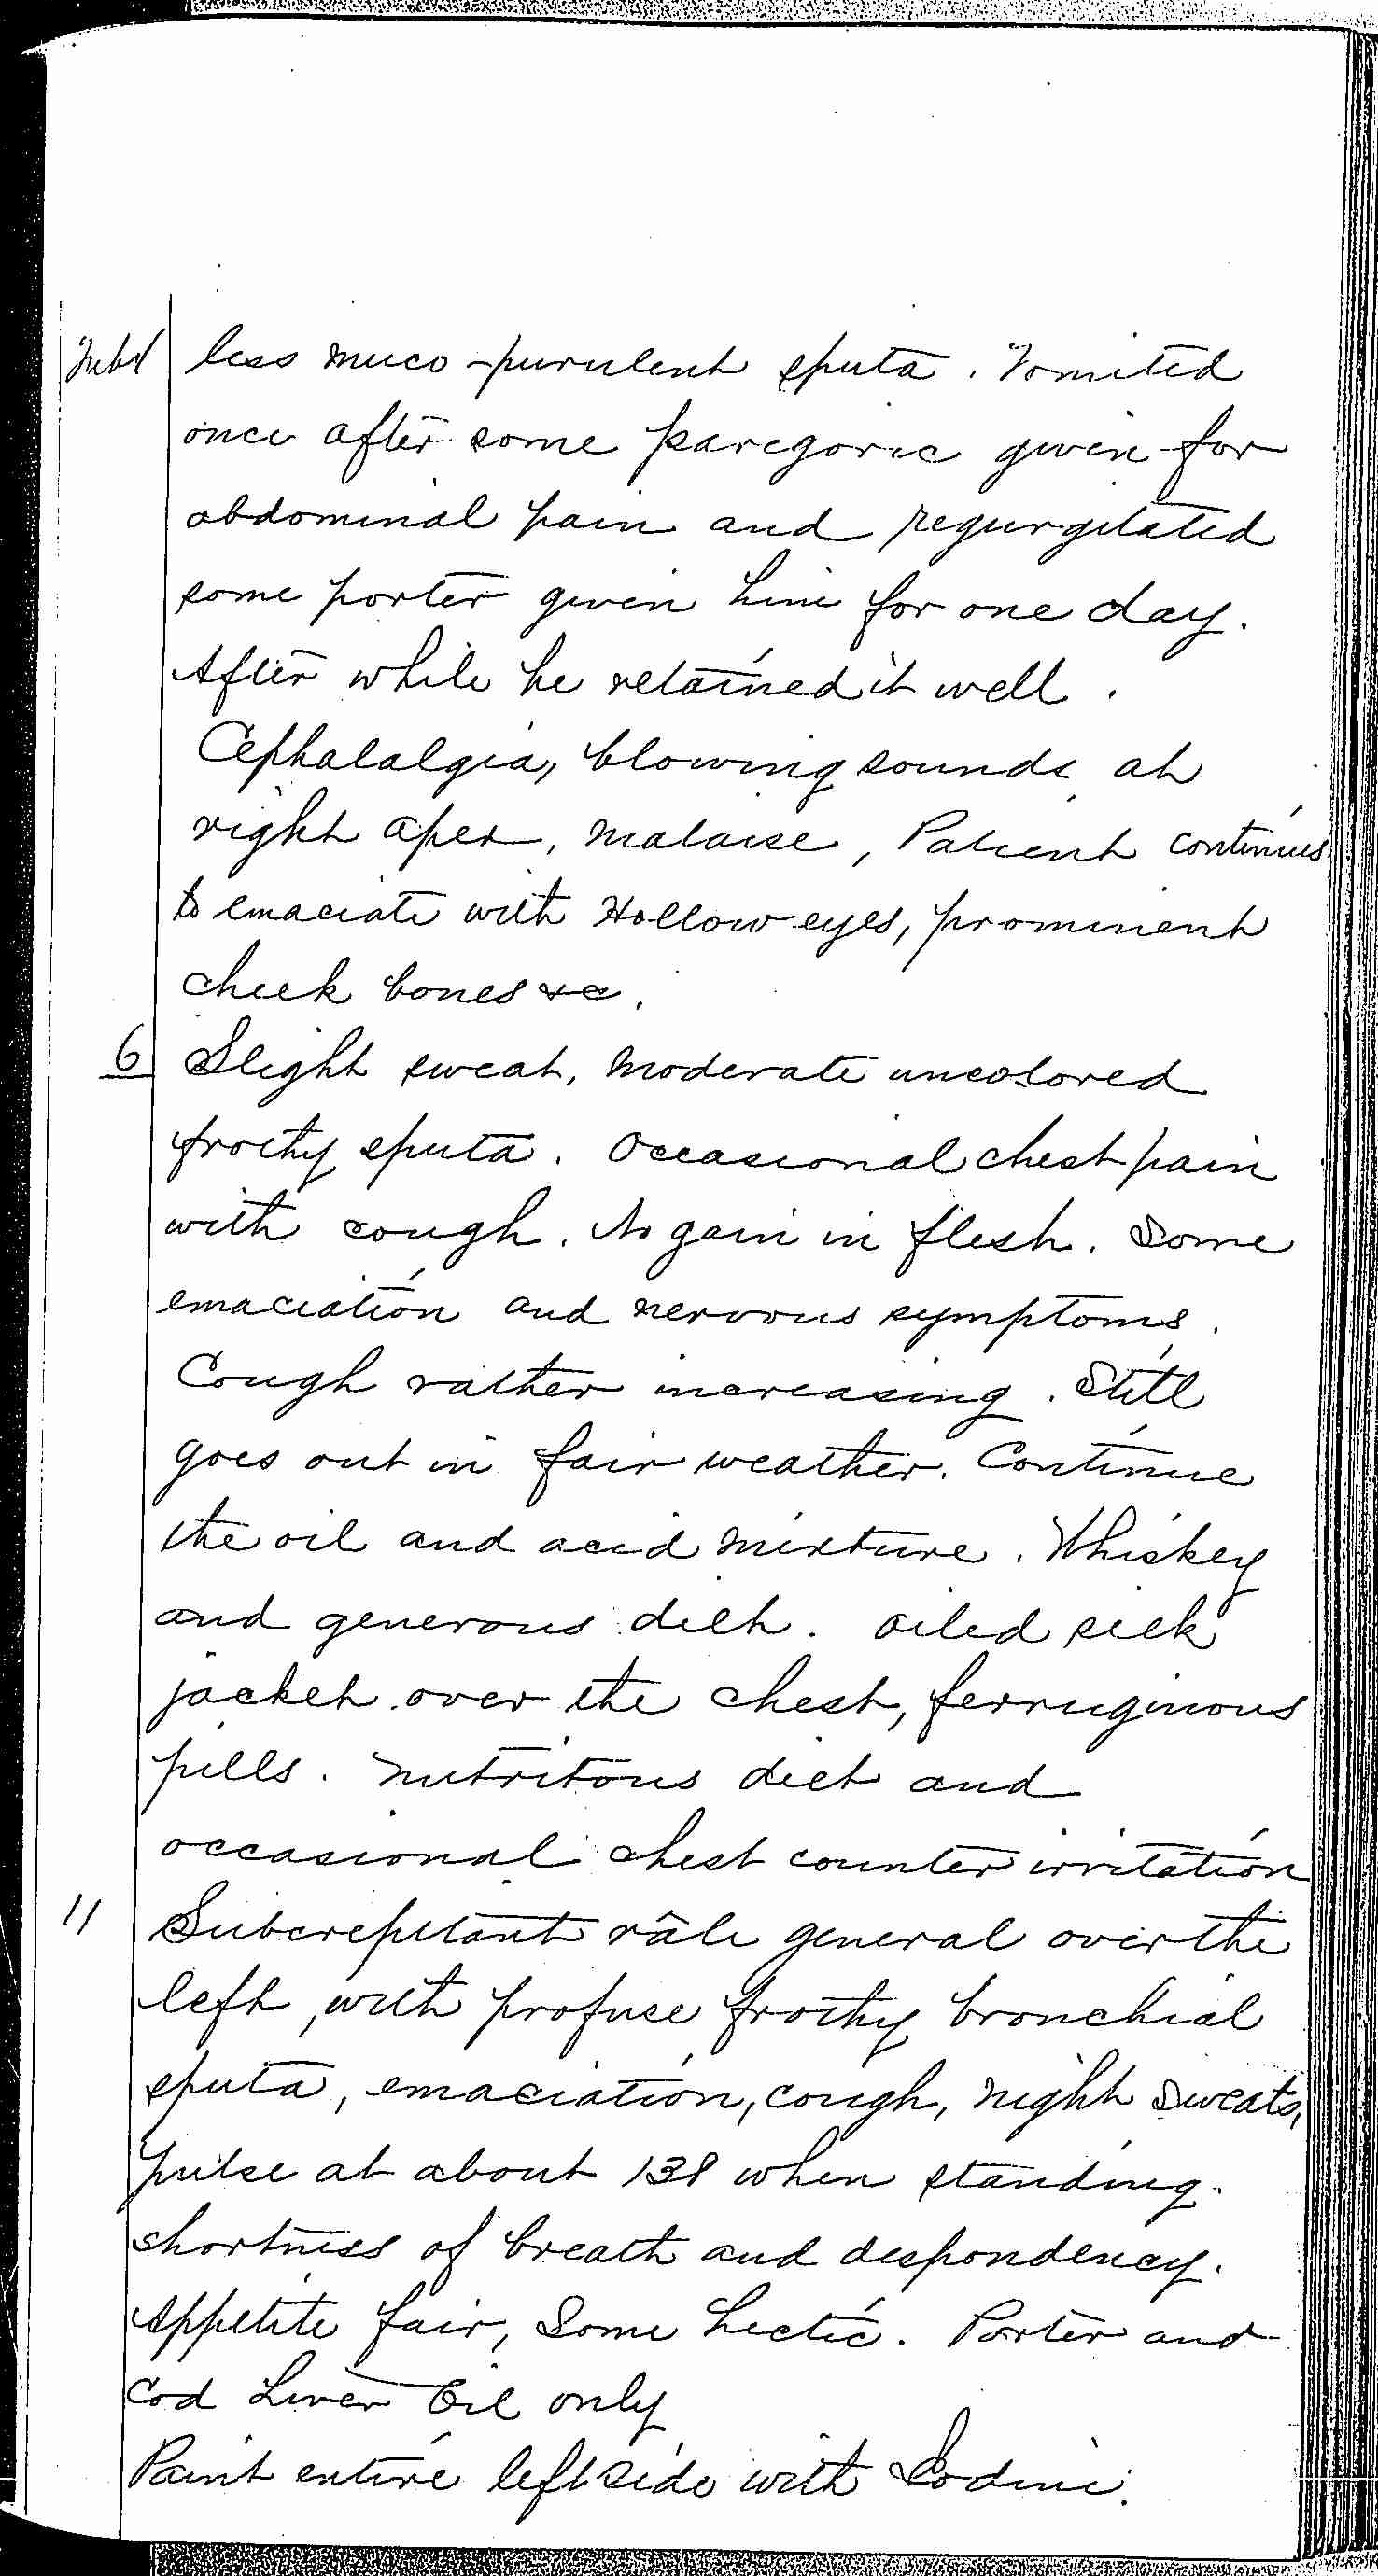 Entry for William Bathwell (page 7 of 13) in the log Hospital Tickets and Case Papers - Naval Hospital - Washington, D.C. - 1868-69